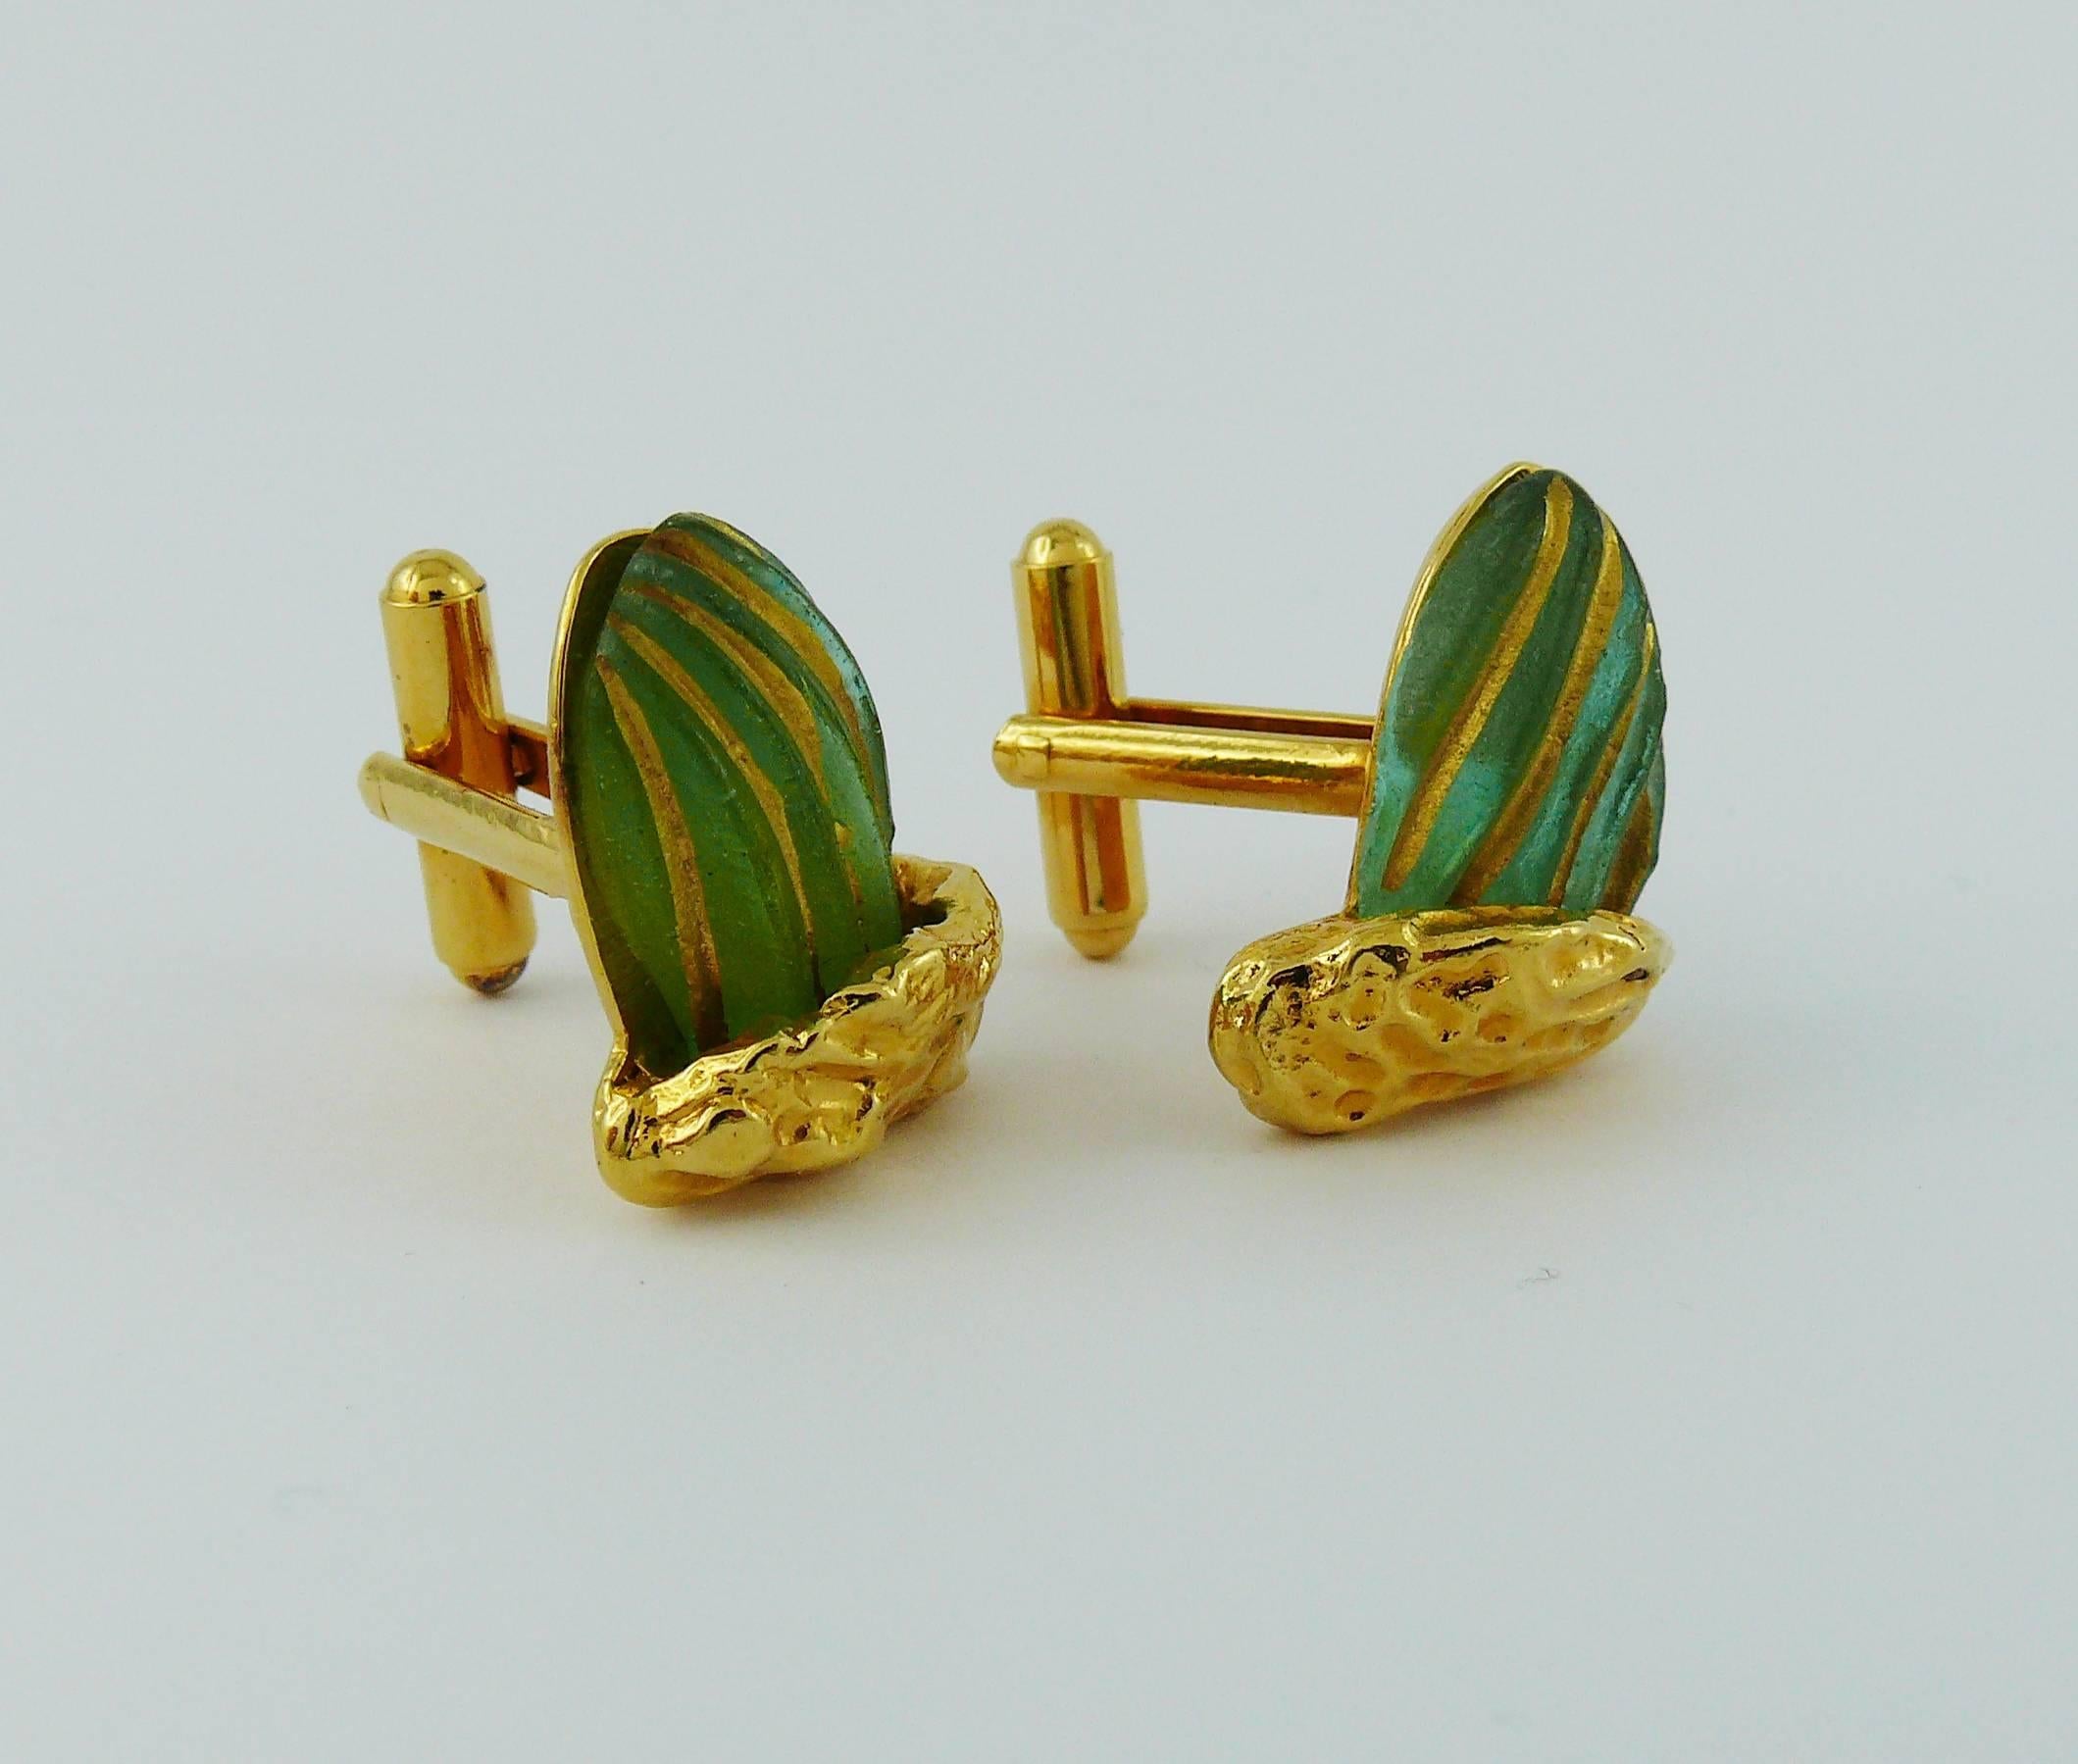 HILTON MAC CONNICO for DAUM vintage pair of cufflinks featuring pate de verre cactus in a gold tone setting.

Embossed HMC DAUM FRANCE.

Indicative measurements : max. length approx. 1.9 cm (0.75 inch) / max. height approx. 2 cm (0.79 inch) / max.